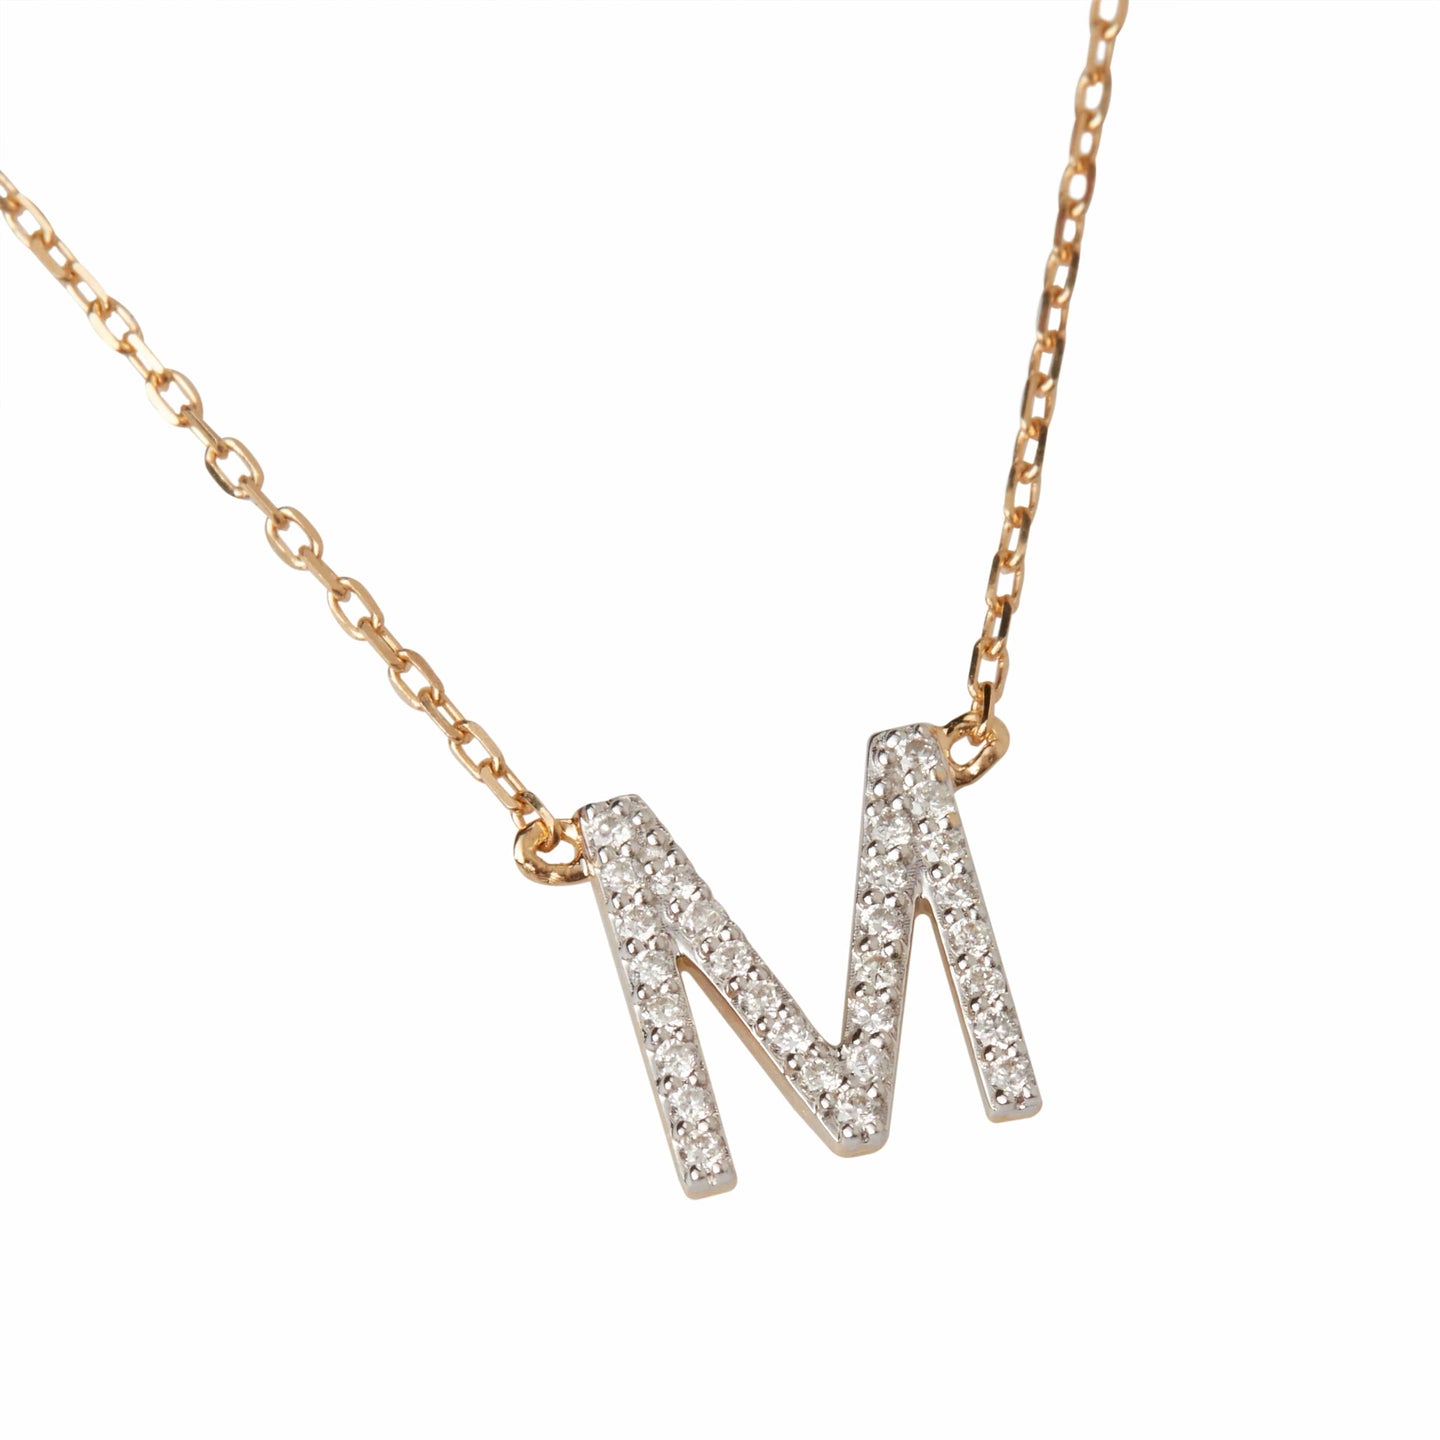 One Initial Diamond Necklace for Children